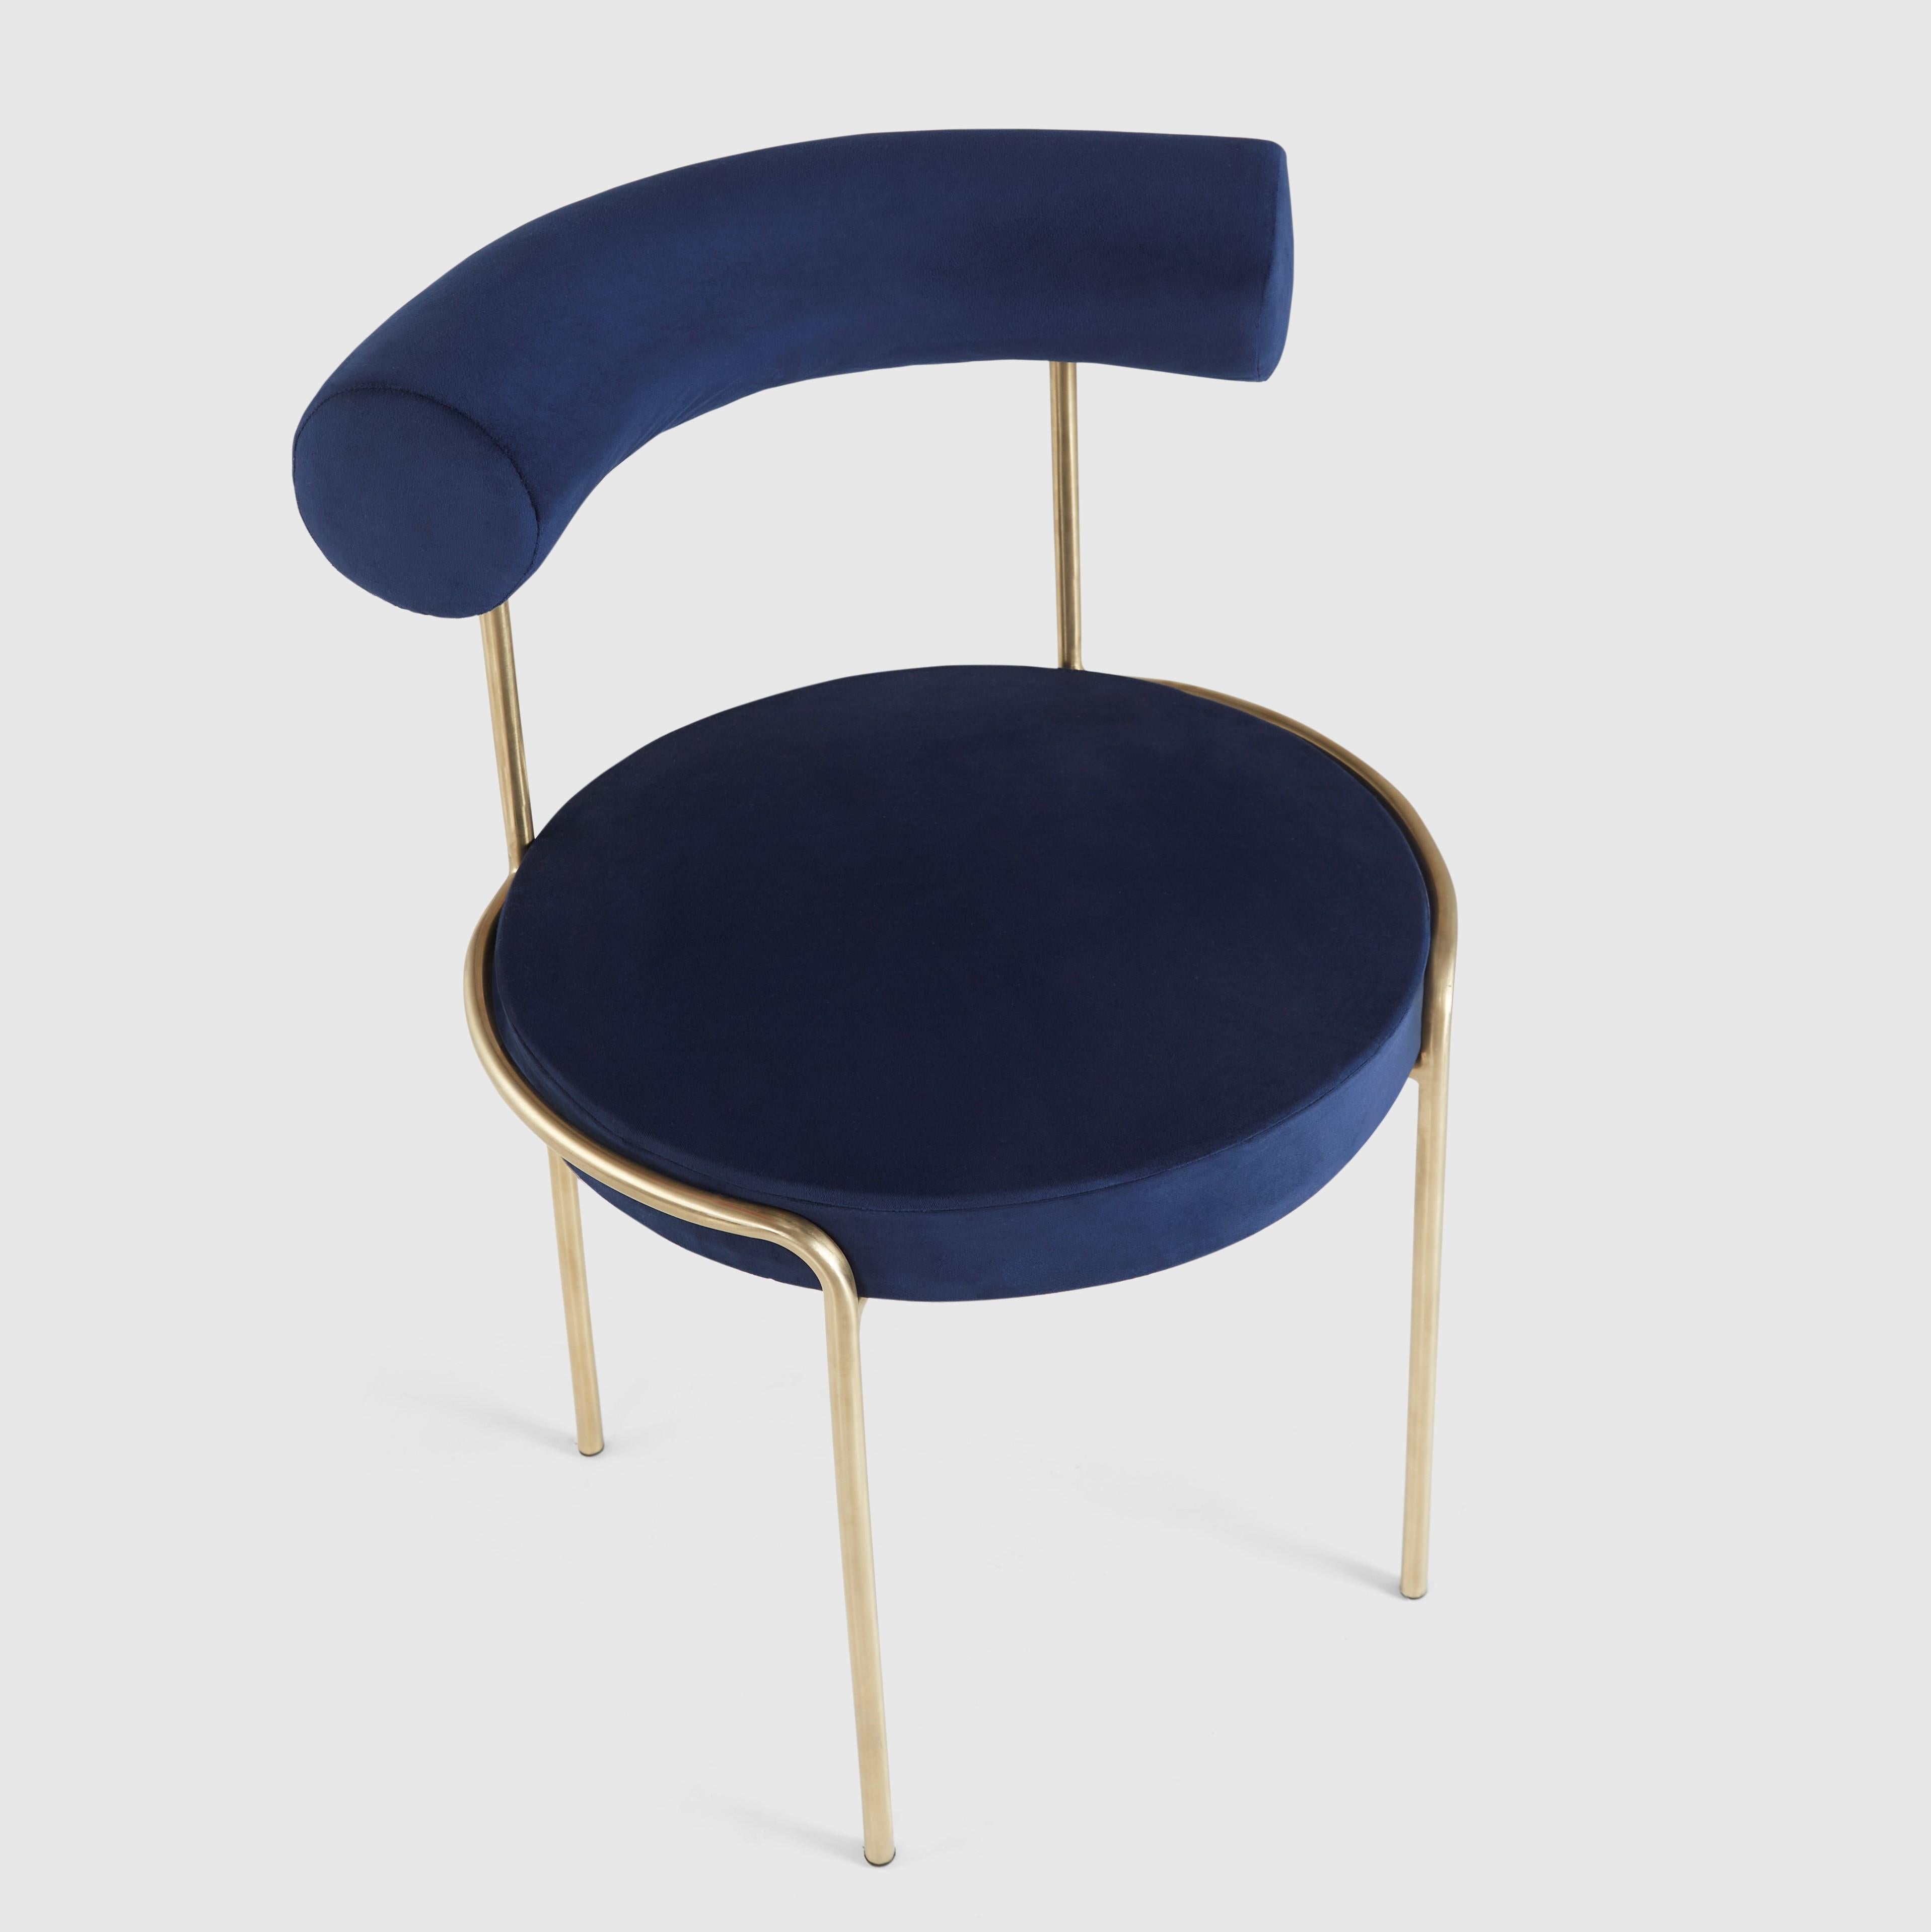 Unique Krest chair gold by Hatsu
Dimensions: D 54 x W 59 x H 78 cm 
Materials: Uphostered seating on powdercoated steel frame

Hatsu is a design studio based in Mumbai that creates modern lighting that are unique and immediately recognisable. We